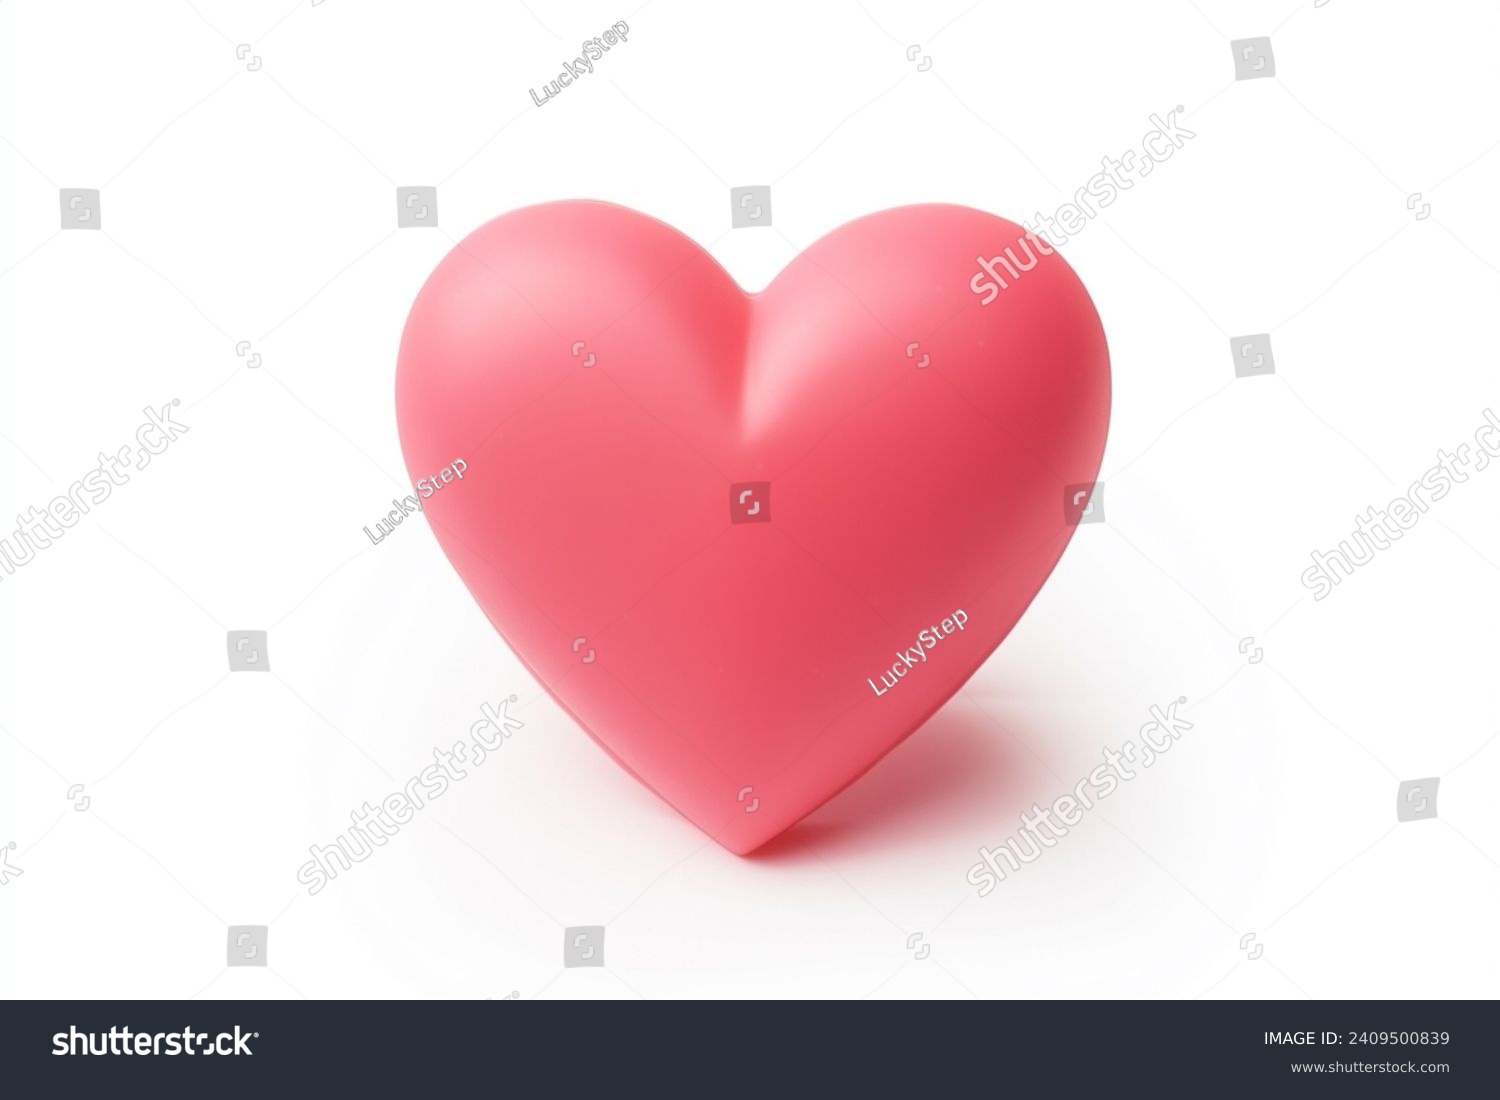 Valentine Day rose pink heart shape gift. Romantic love greeting present soft texture  macro photo on white background #2409500839